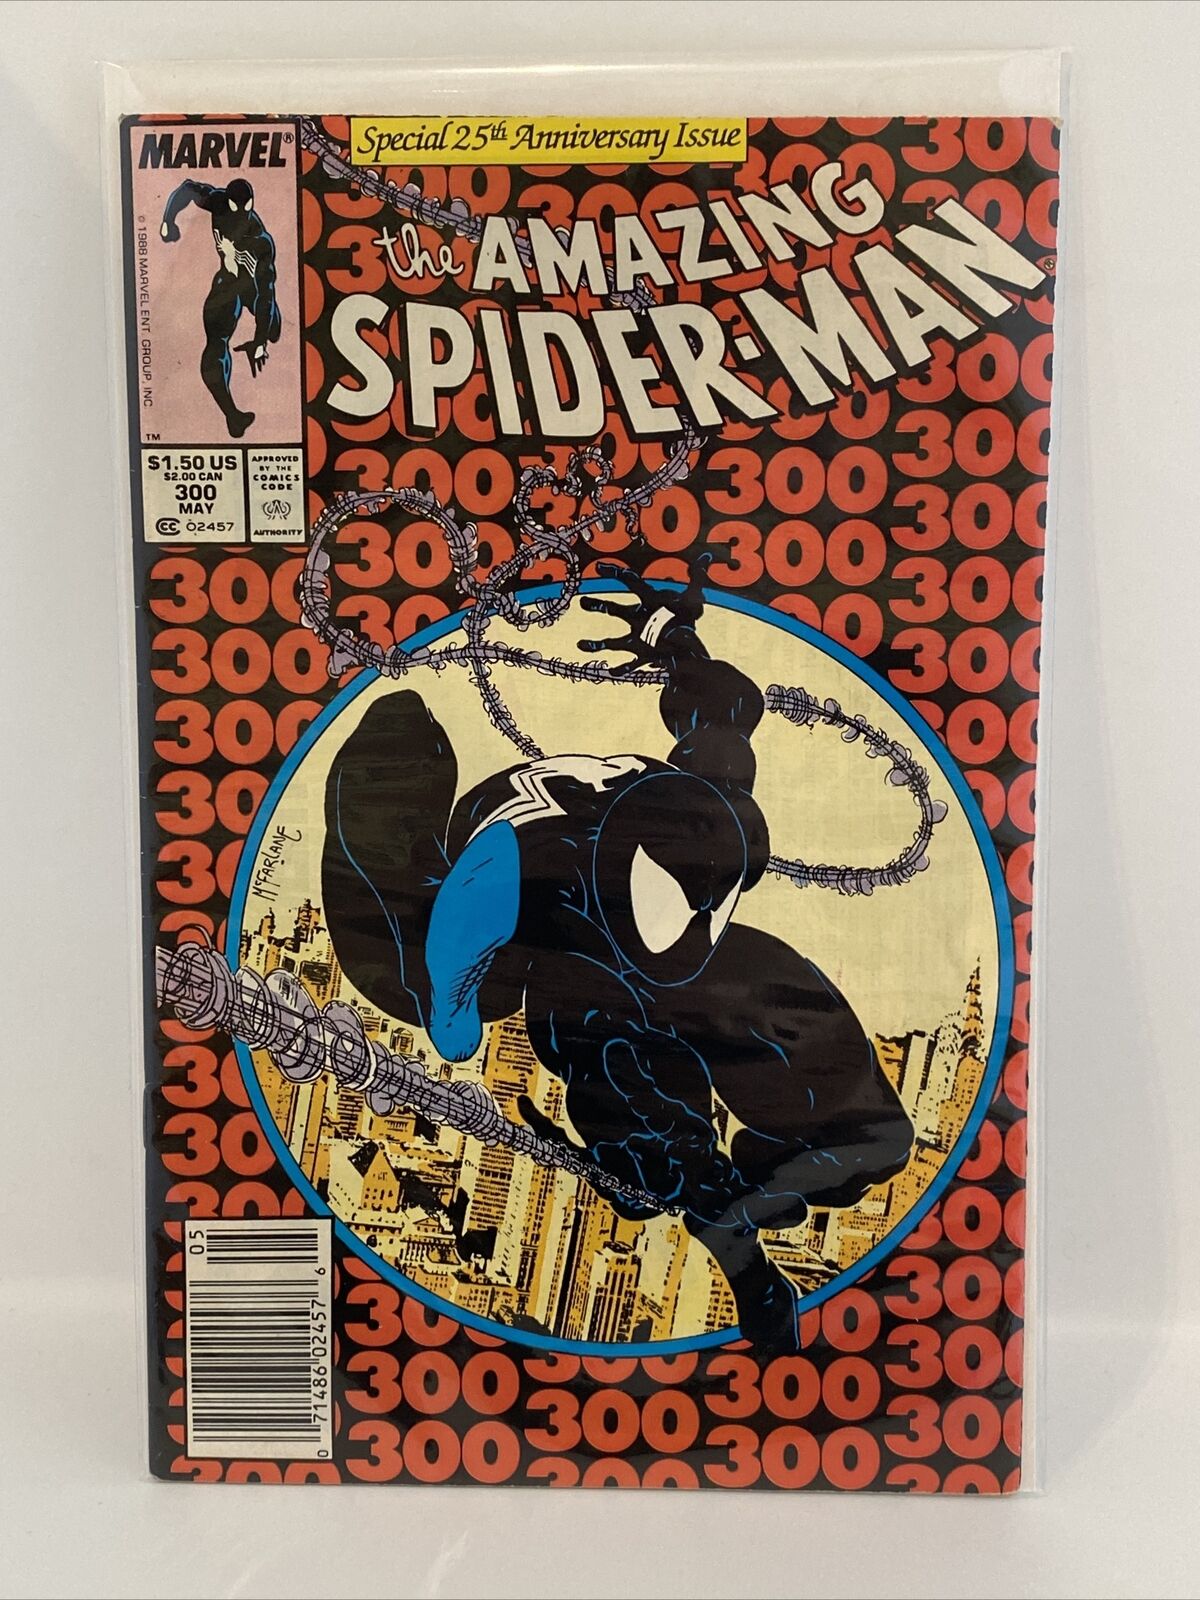 The Amazing Spider-Man #300 (May 1988, Marvel) 25th Anniversary Issue